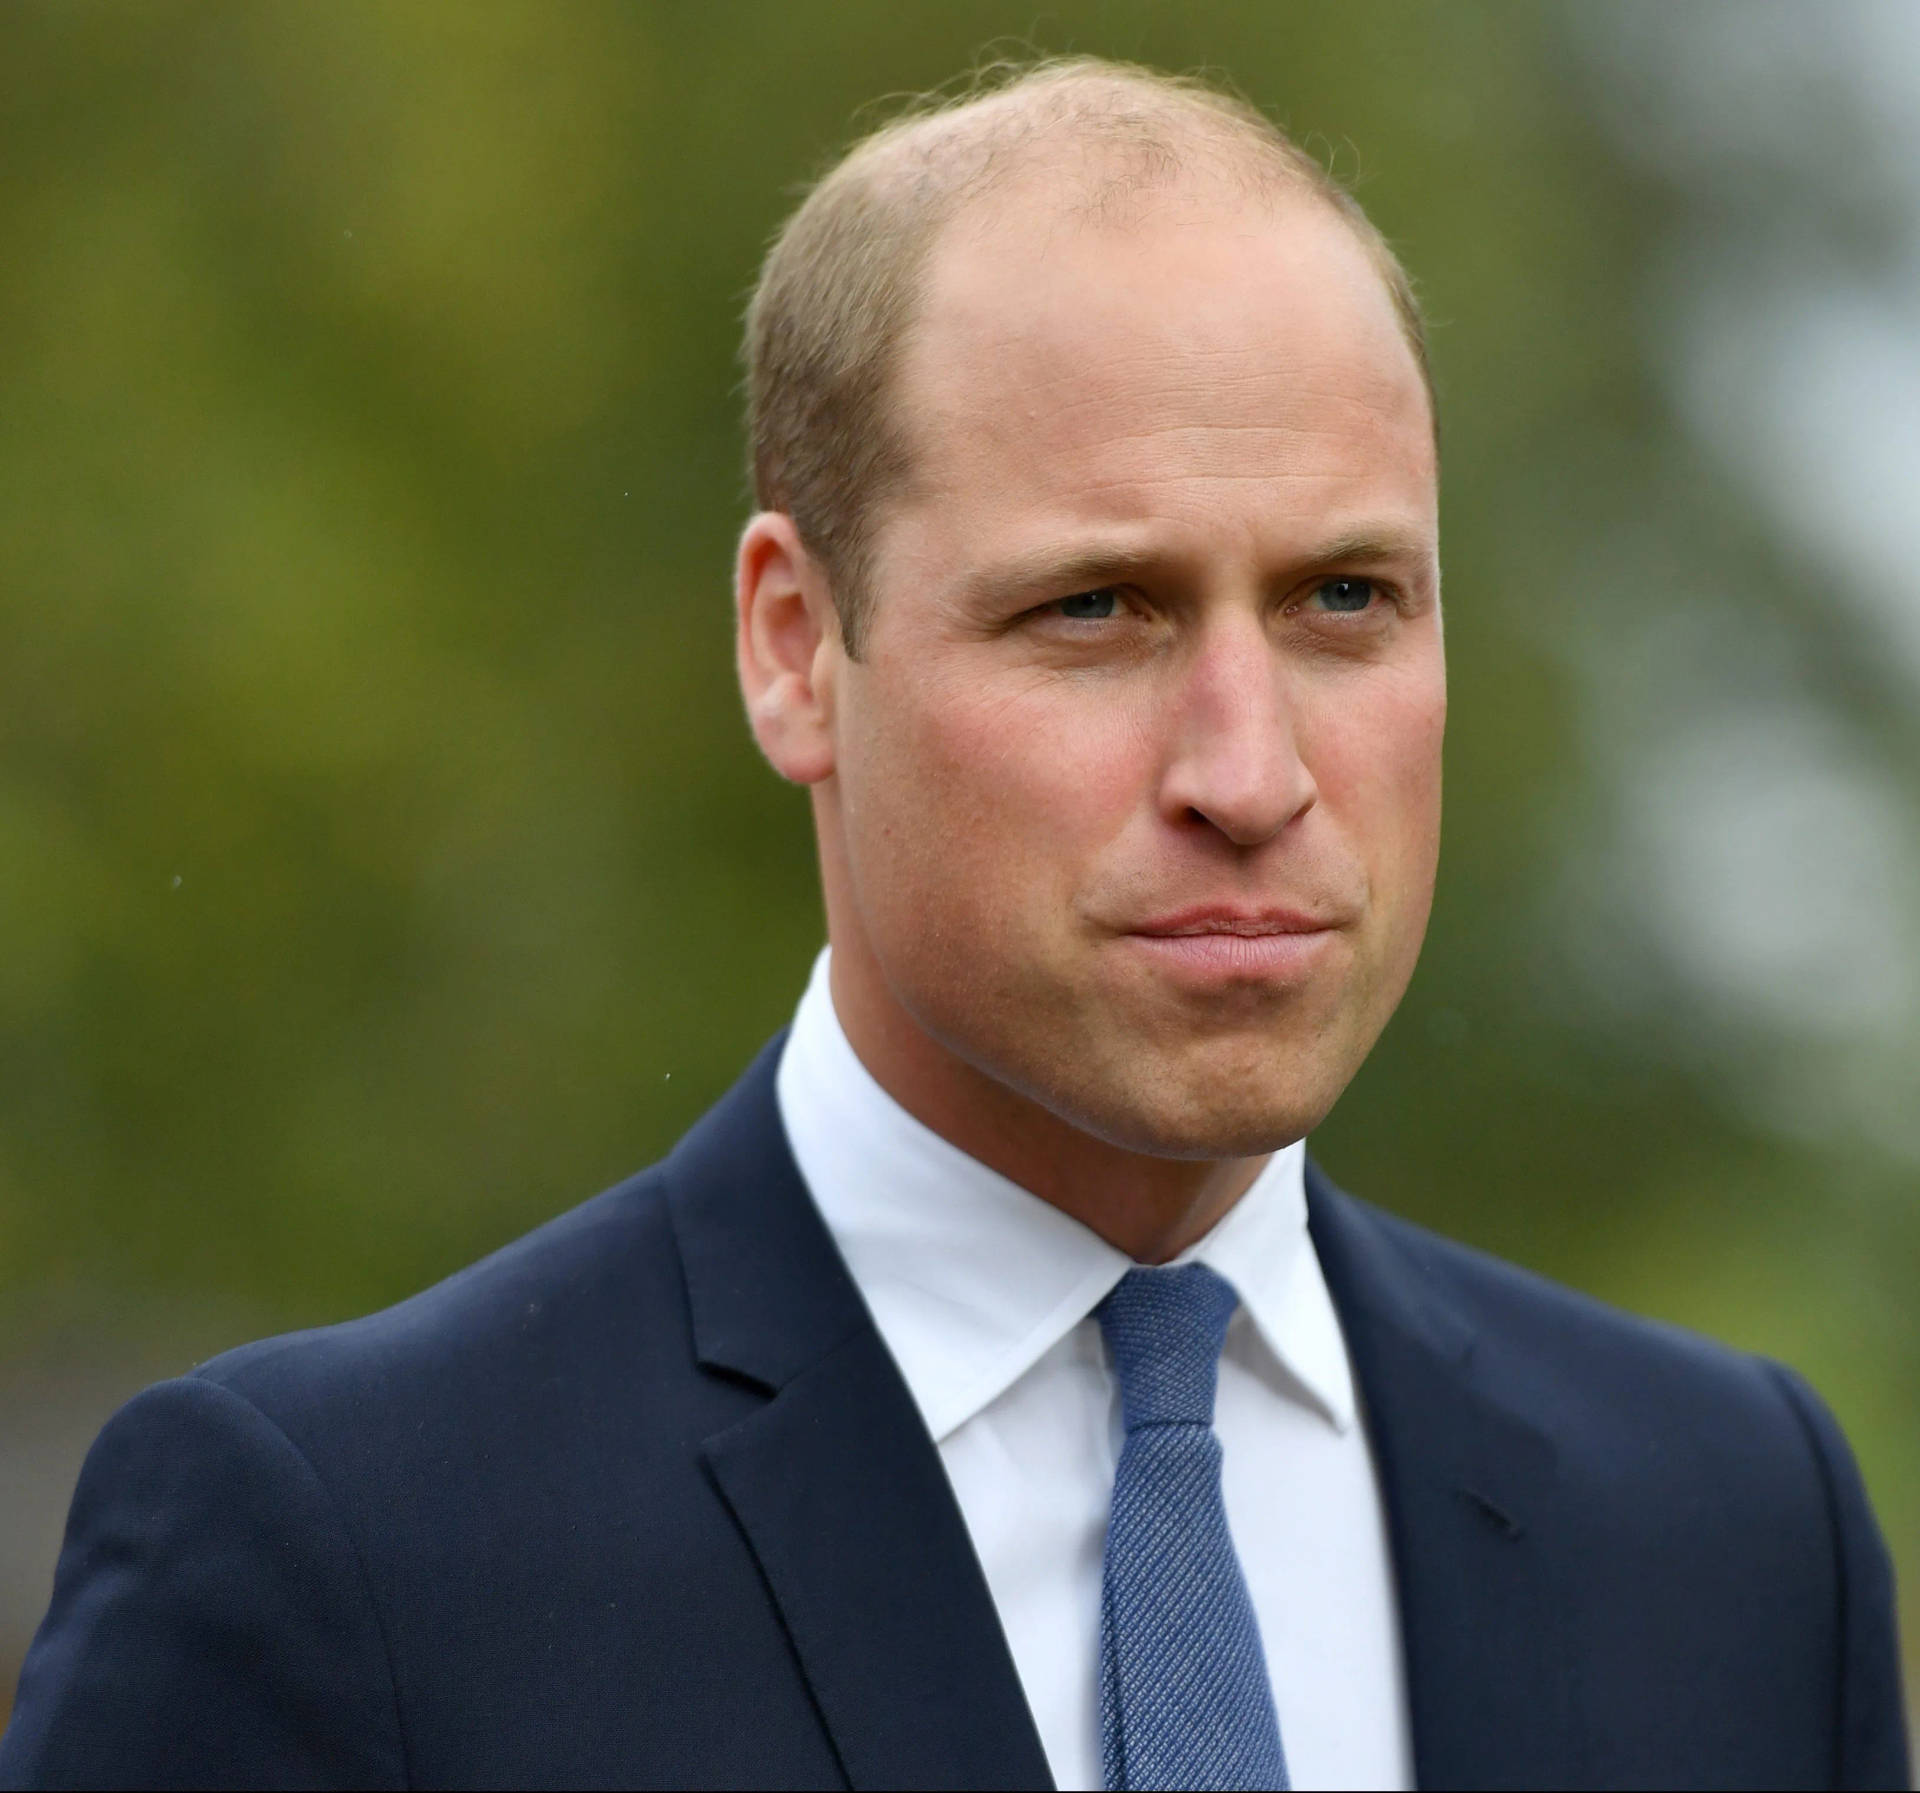 Prince William Of Wales Wallpaper